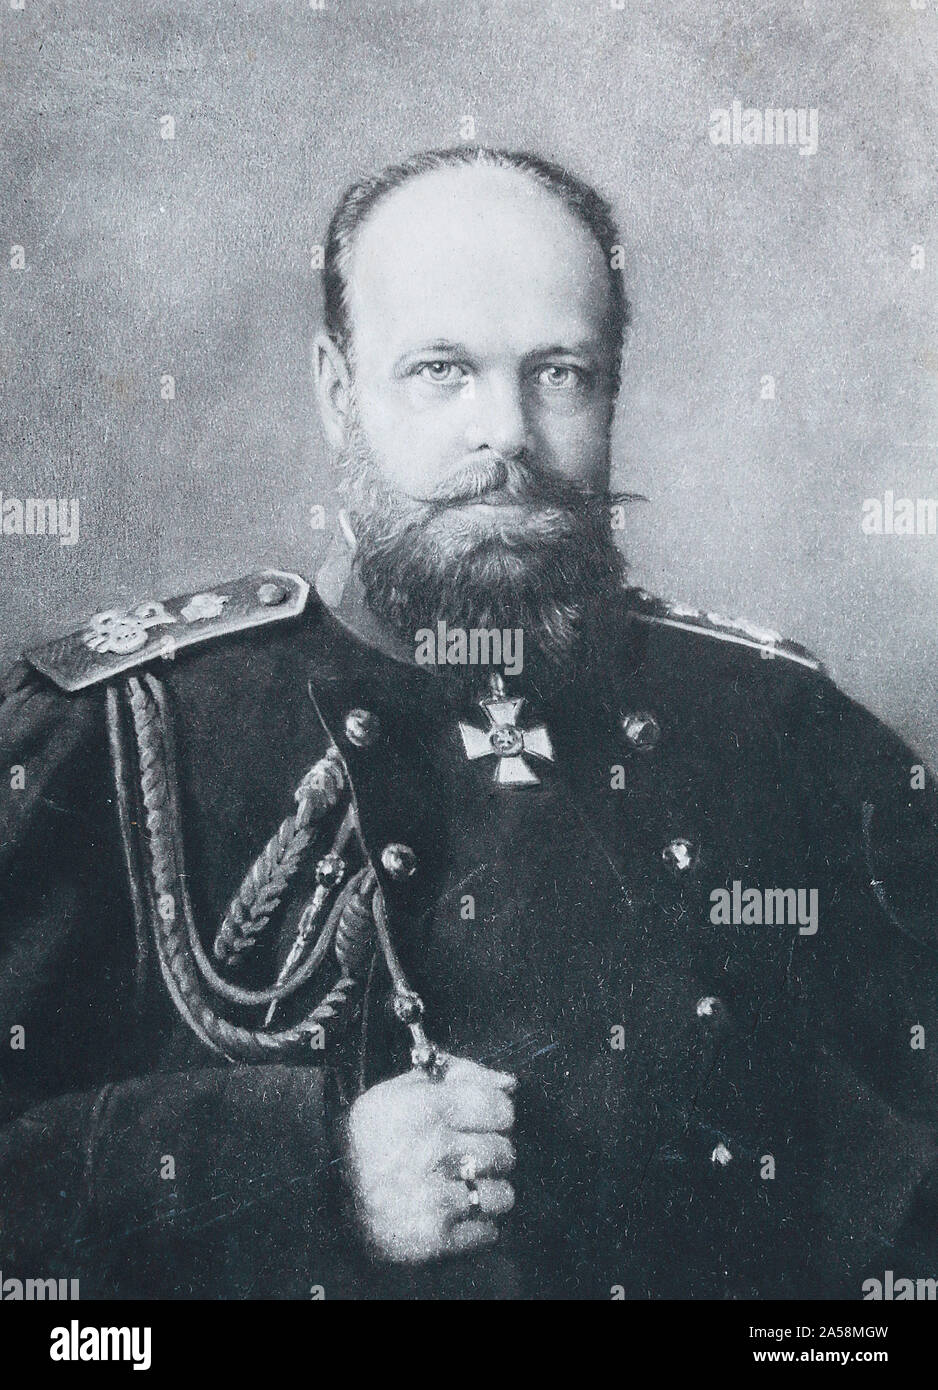 Portrait of His Majesty Russian Emperor Alexander III. Engraving of the 19th century. Stock Photo